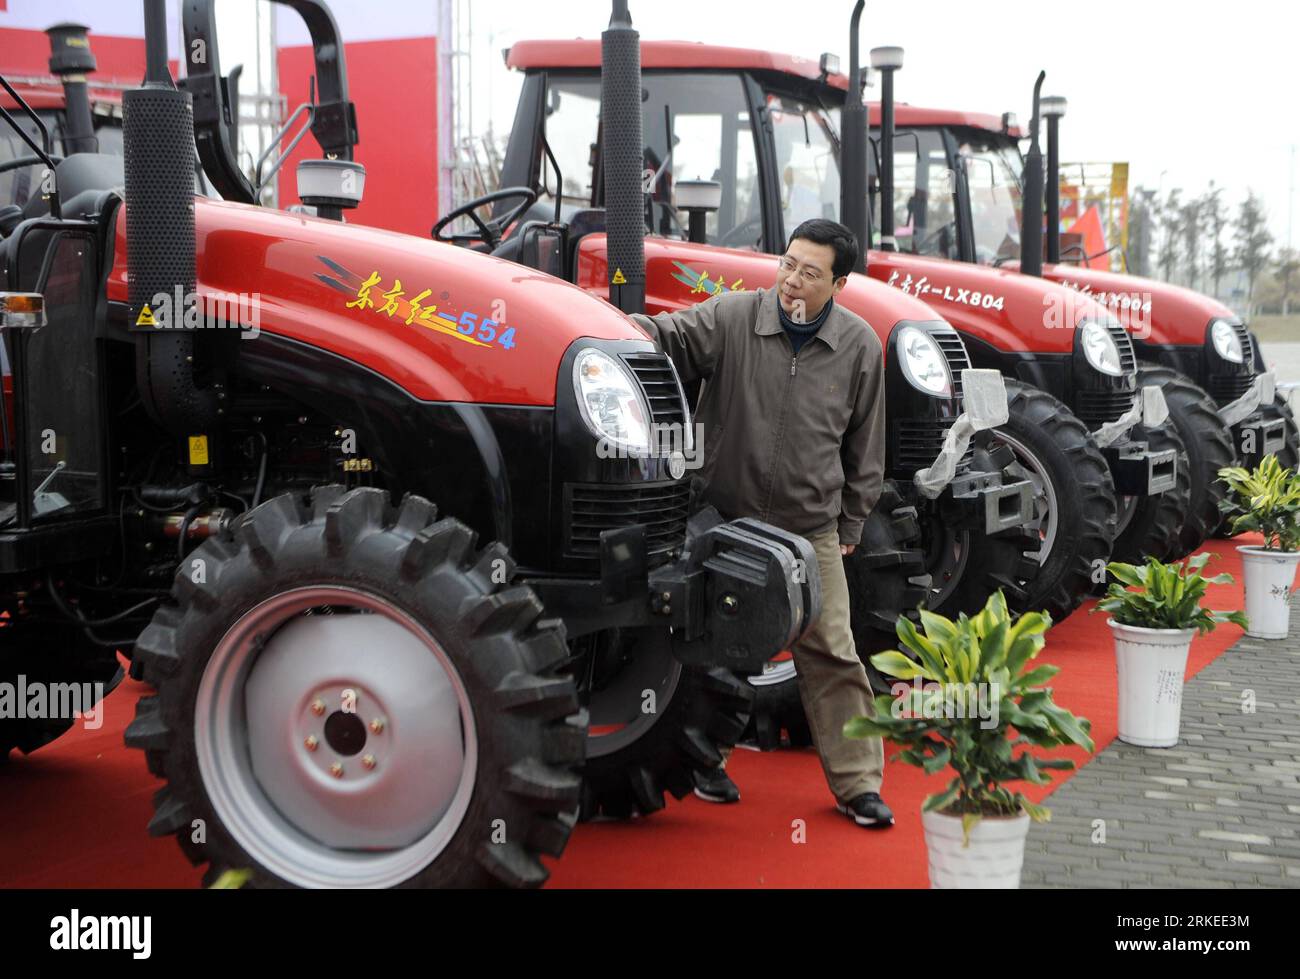 Bildnummer: 55244090  Datum: 07.04.2011  Copyright: imago/Xinhua (110407) -- NANJING, April 7, 2011 (Xinhua) -- Tractors are seen during AGMA China 2011 in Nanjing, capital of east China s Jiangsu Province, April 7, 2011. AGMA China 2011, a three-day international farm machinery fair, kicked off here Thursday, with the participation of more than 360 exhibitors from 21 countries and regions. (Xinhua/Dong Jinlin) (ljh)  CHINA-NANJING-AGMA CHINA 2011-OPEN (CN) PUBLICATIONxNOTxINxCHN Wirtschaft Landwirtschaft Messe Agrarmesse Landwirtschaftsmesse Objekte kbdig xsk 2011 quer o0 Traktor    Bildnumme Stock Photo